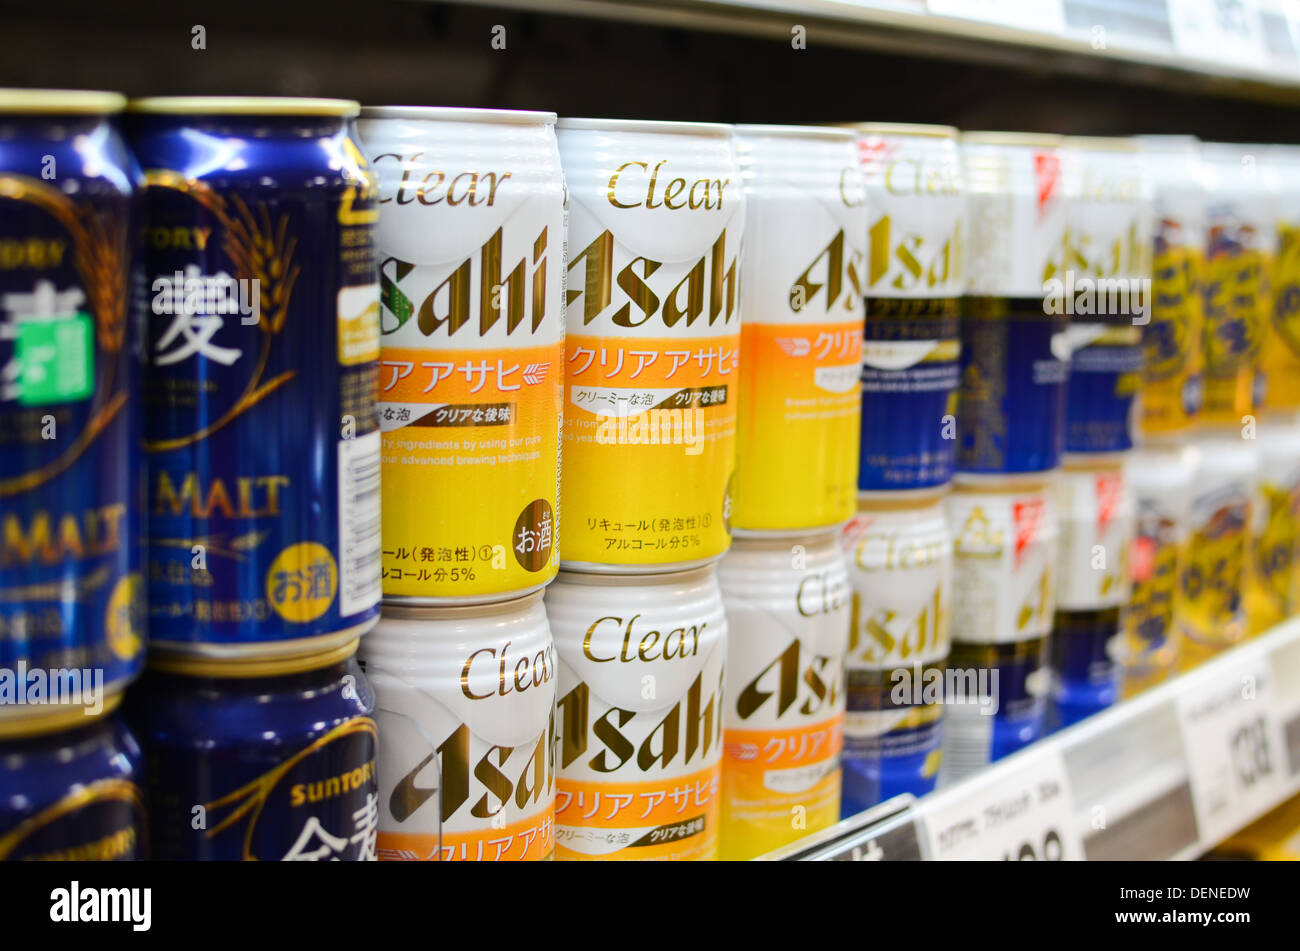 Japanese beer-like drink for sale in a supermarket in Japan. Stock Photo